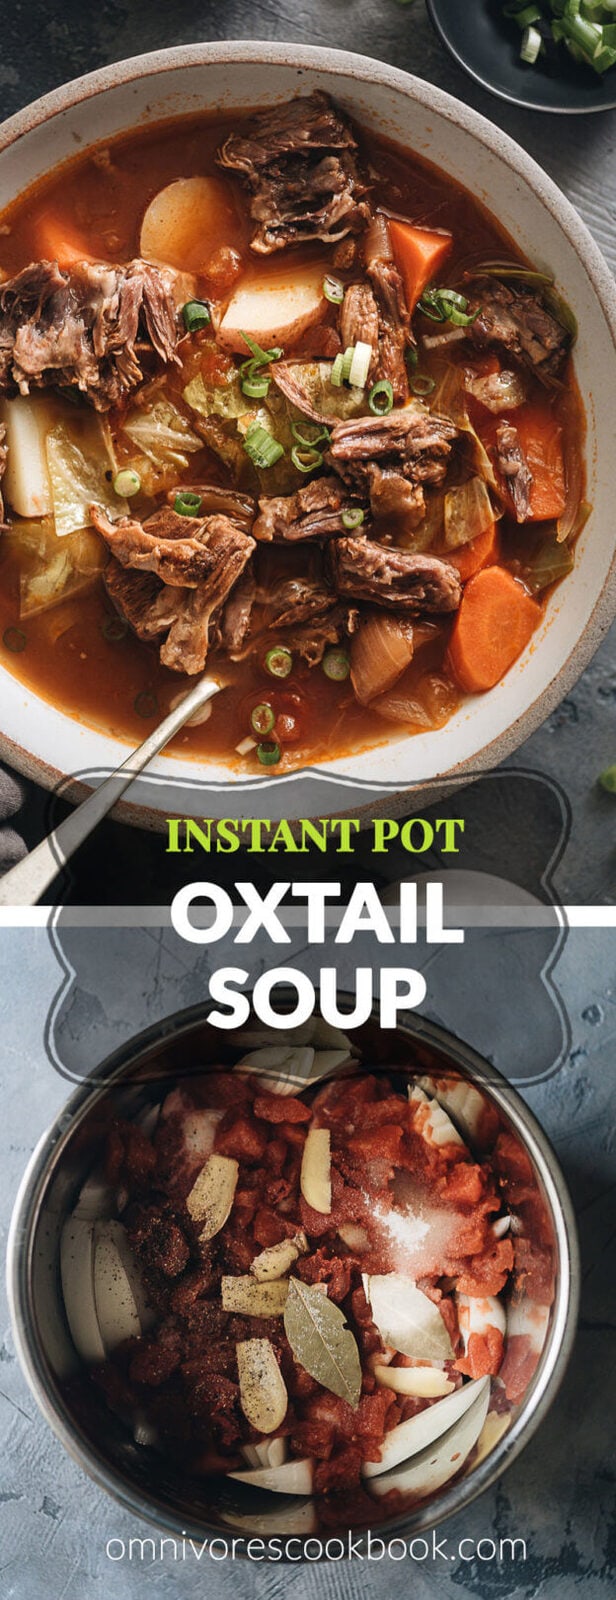 Pressure Cooker Oxtail Soup (An Instant Pot Recipe) - Omnivore's Cookbook